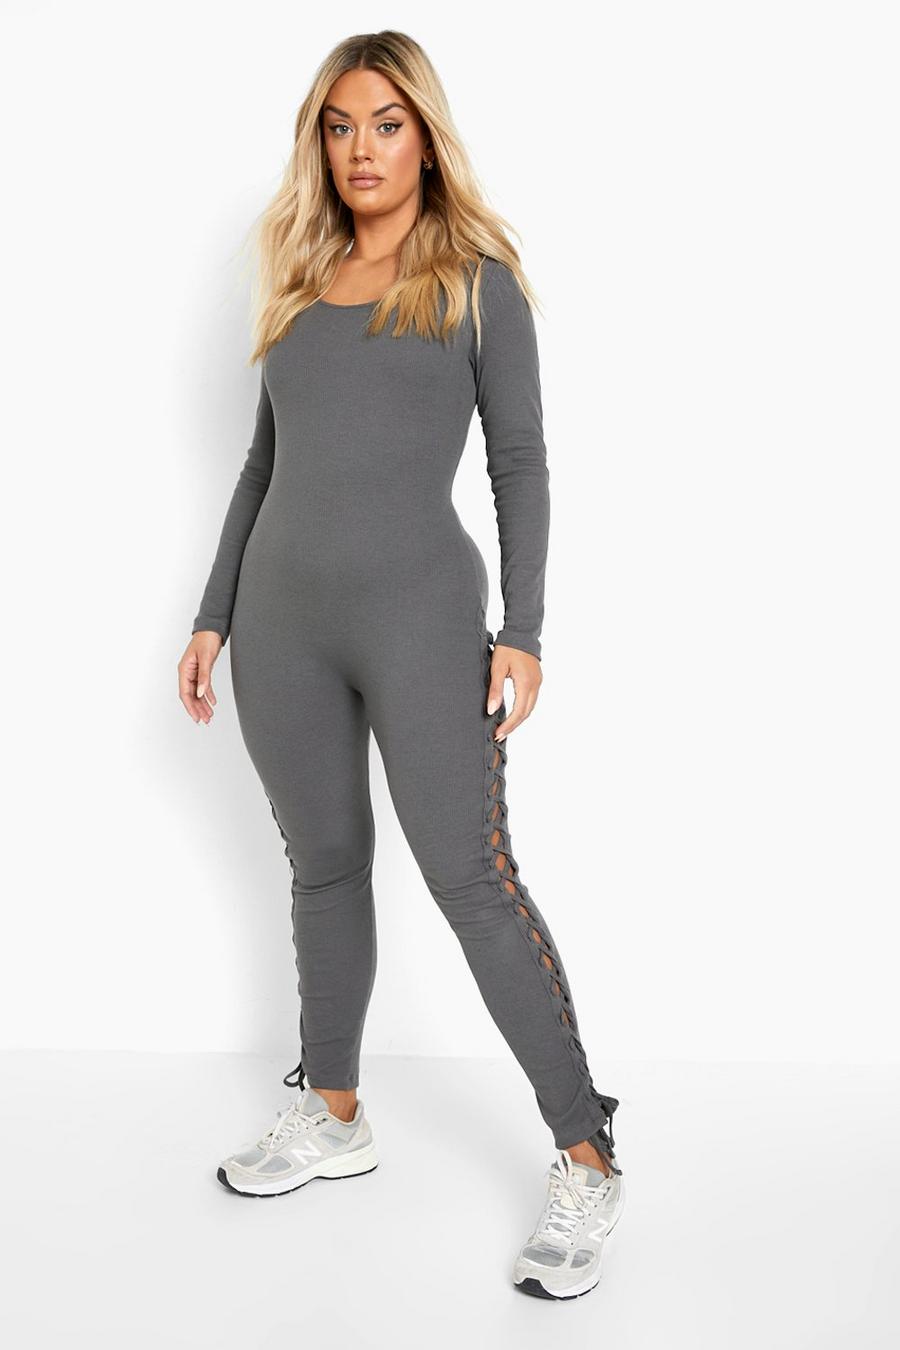 Charcoal grey Plus Rib Long Sleeve Lace Up Jumpsuit